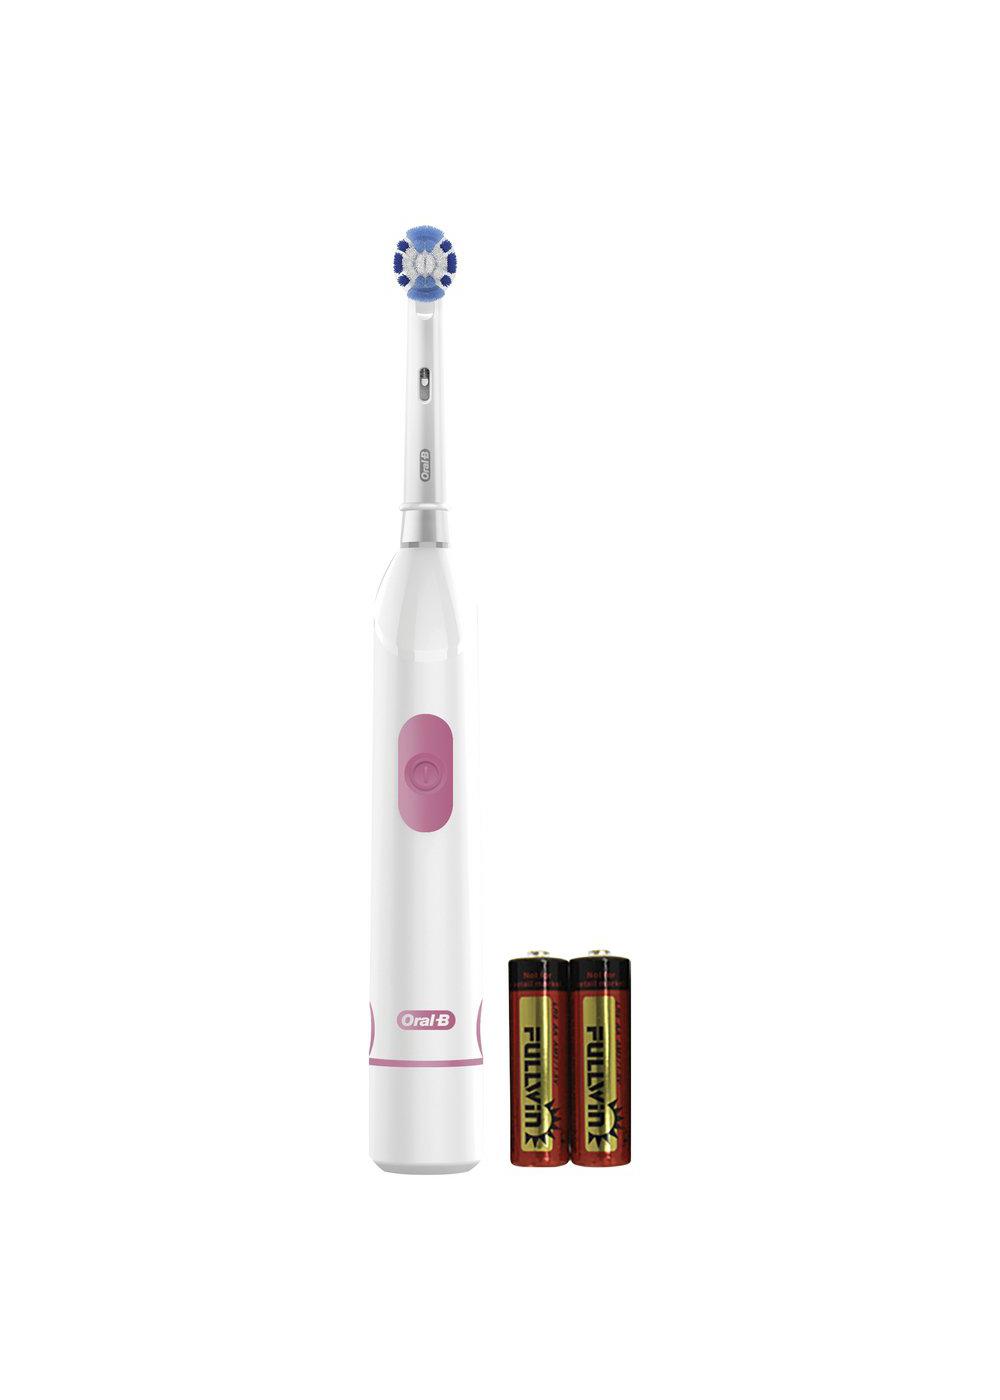 Oral-B Revolution Battery Toothbrush with Brush Head - White; image 2 of 6